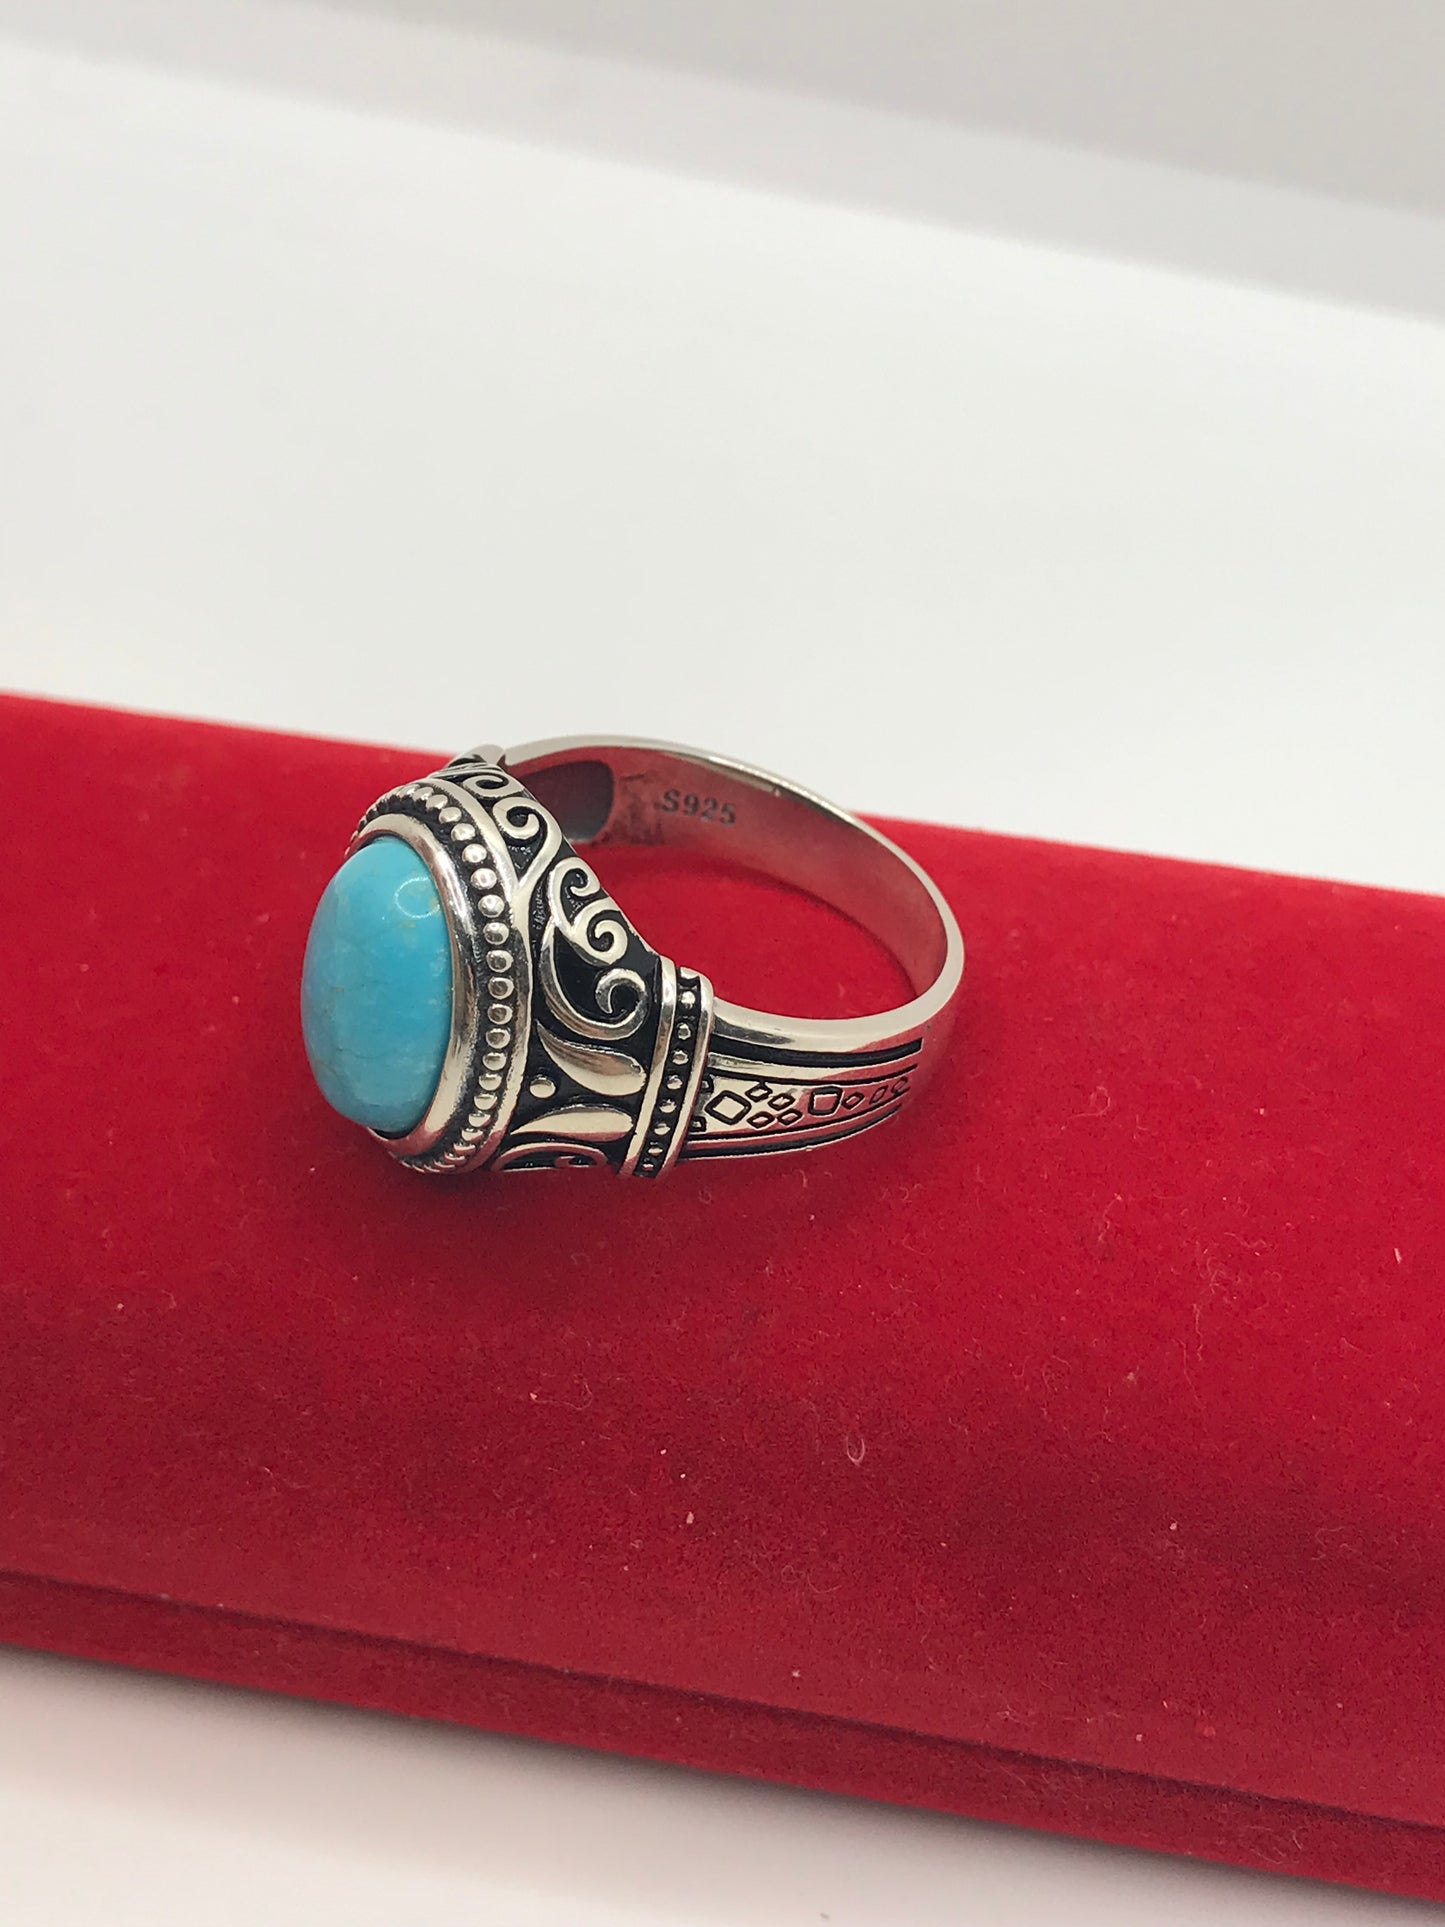 Sterling silver turquoise stone ring